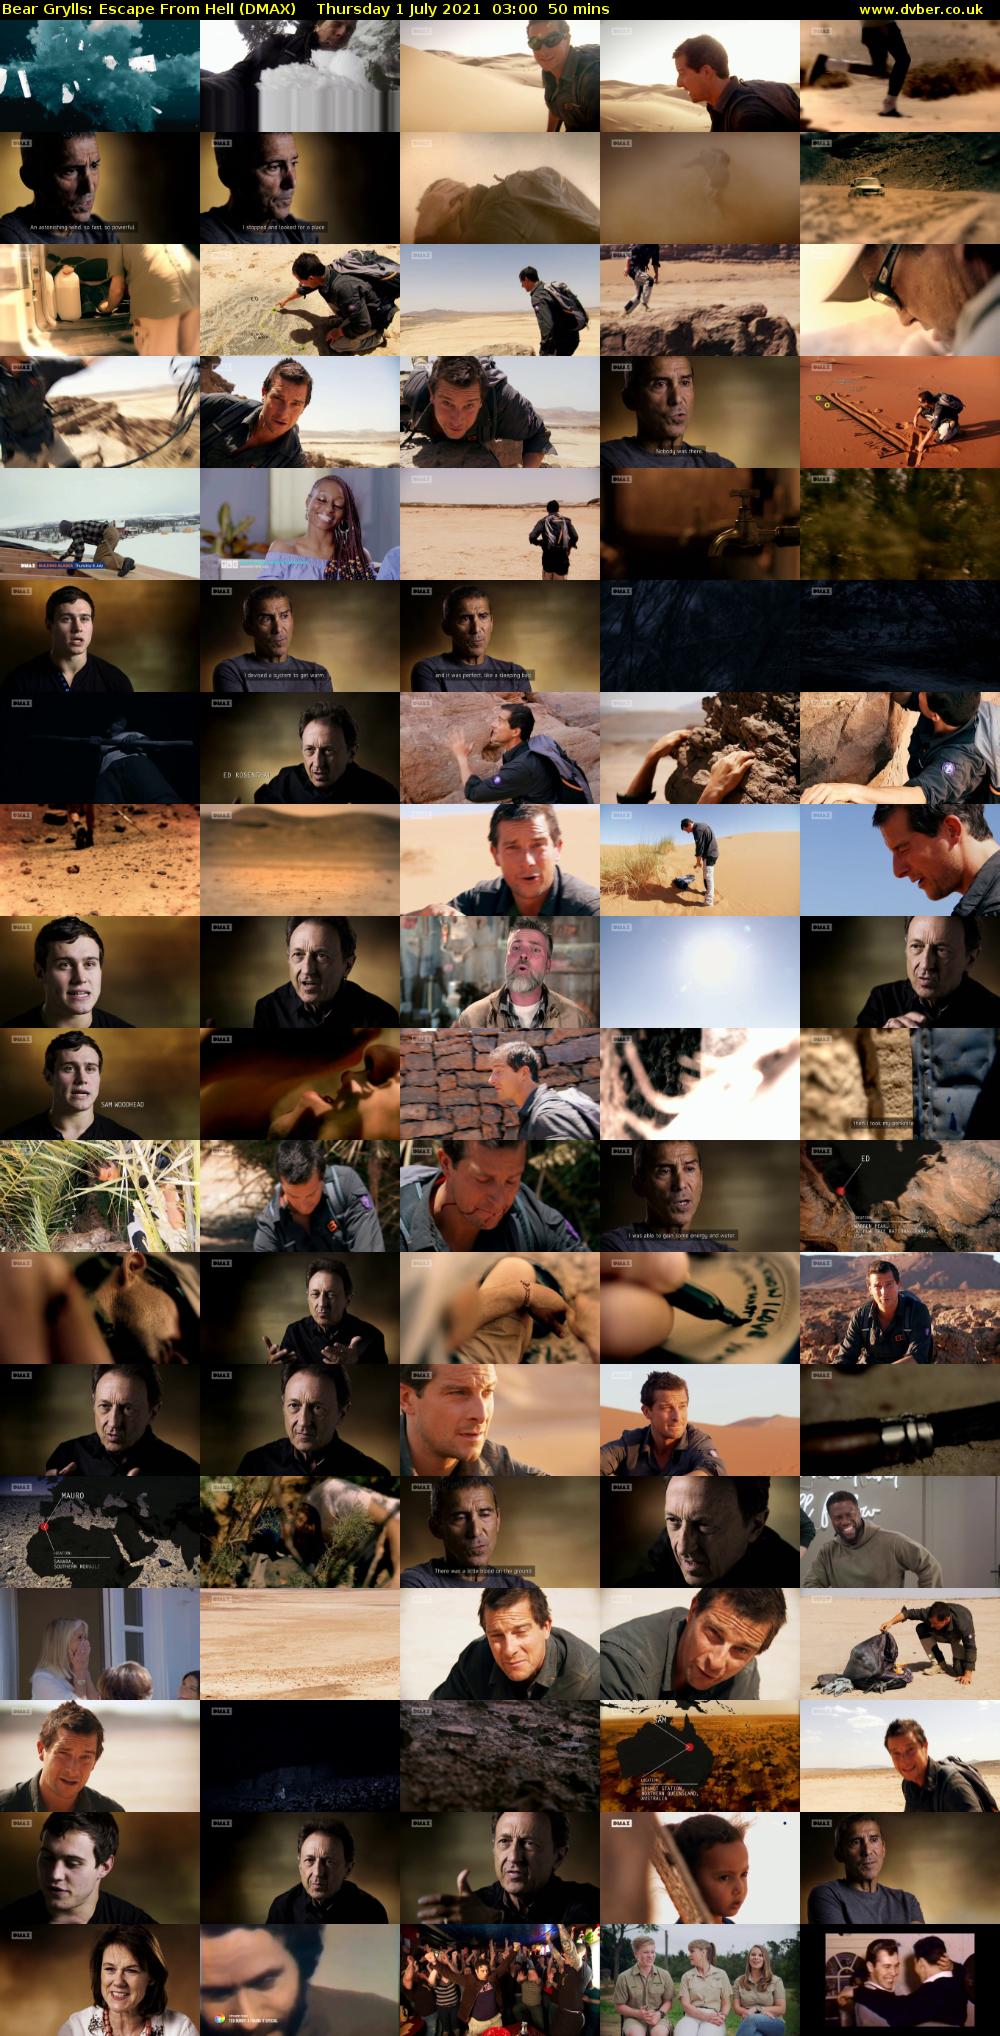 Bear Grylls: Escape From Hell (DMAX) Thursday 1 July 2021 03:00 - 03:50